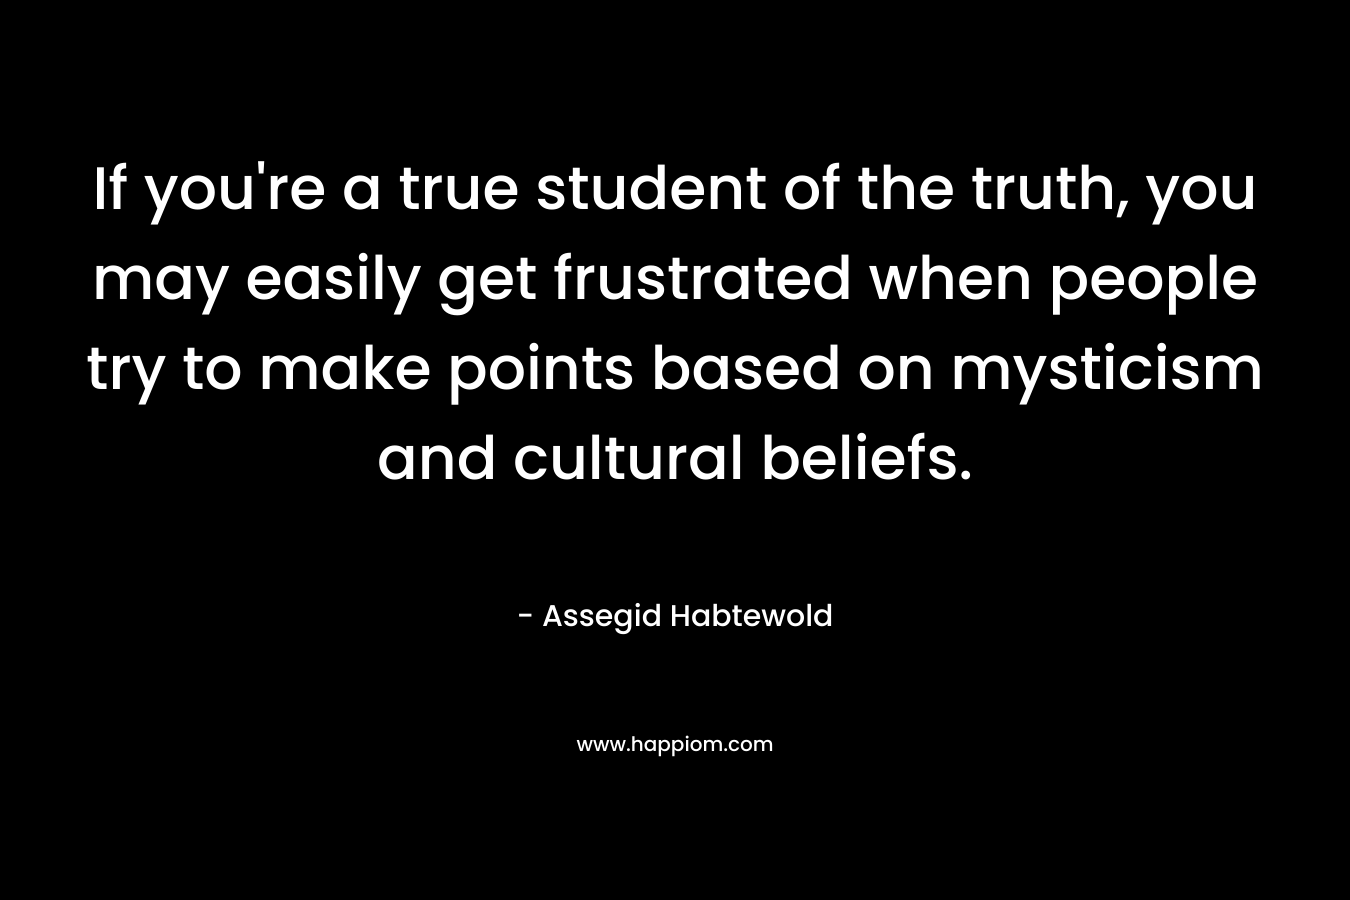 If you’re a true student of the truth, you may easily get frustrated when people try to make points based on mysticism and cultural beliefs. – Assegid Habtewold